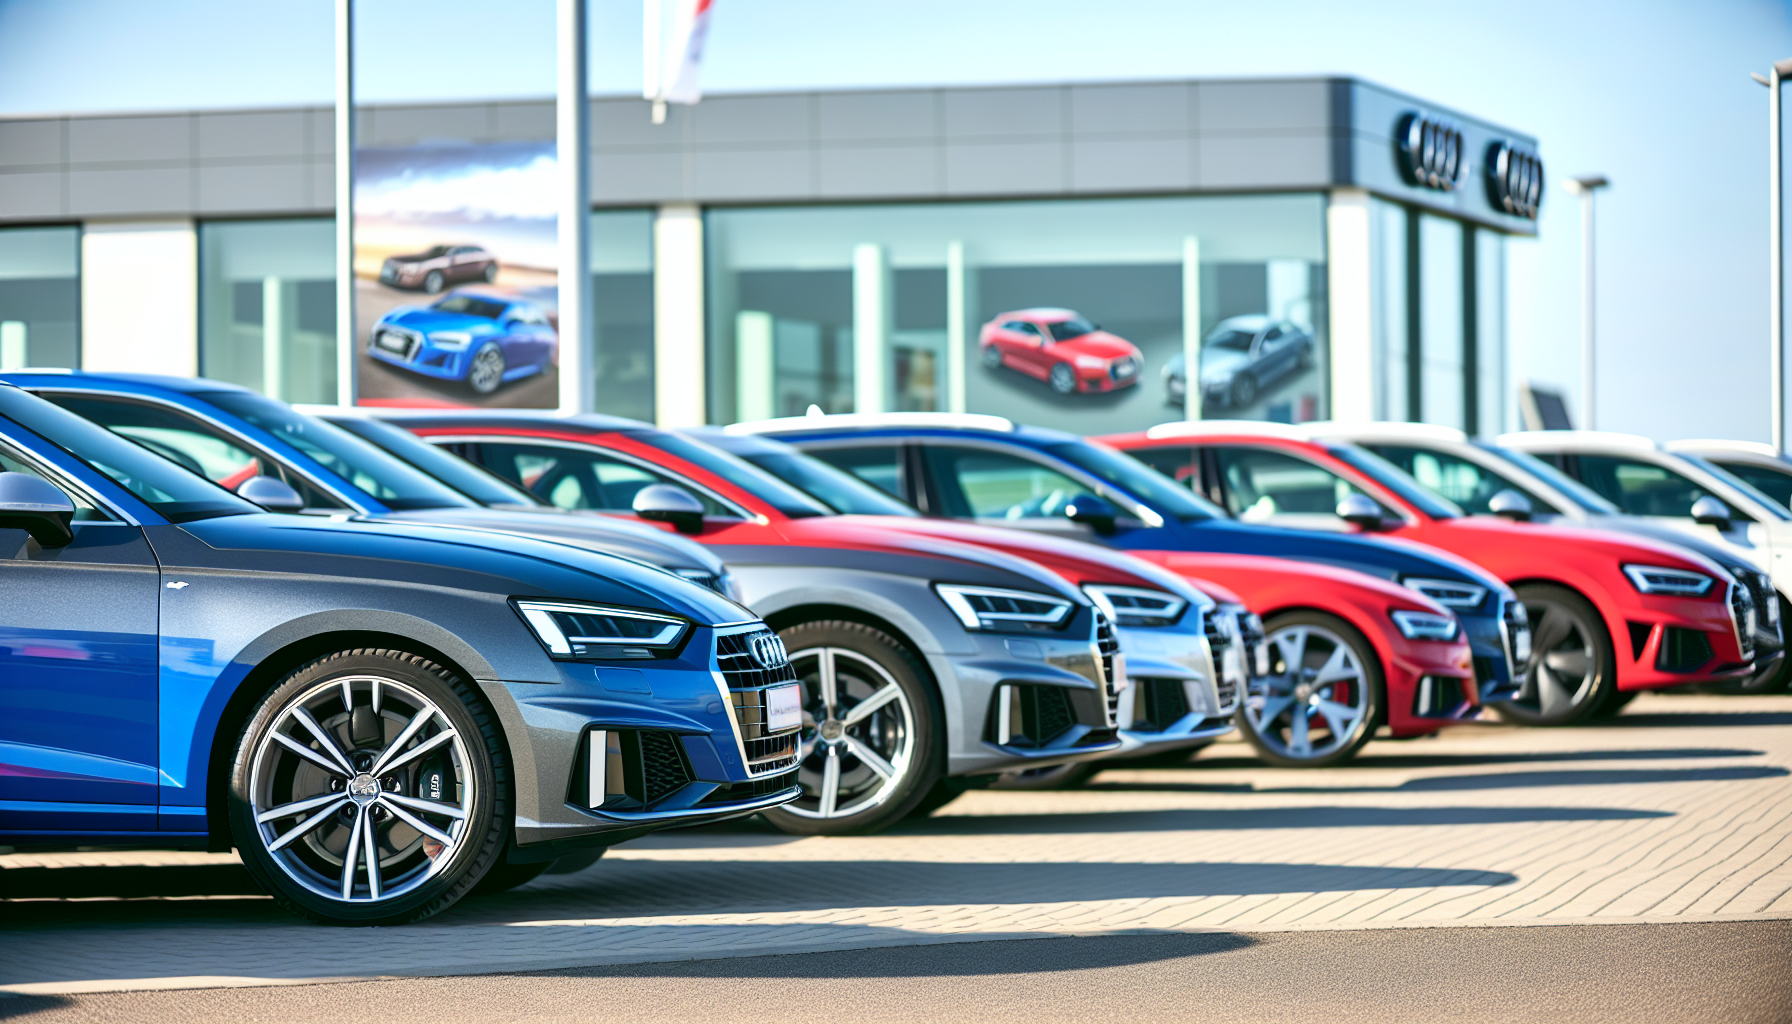 A variety of Audi vehicles lined up in a row at a car dealership